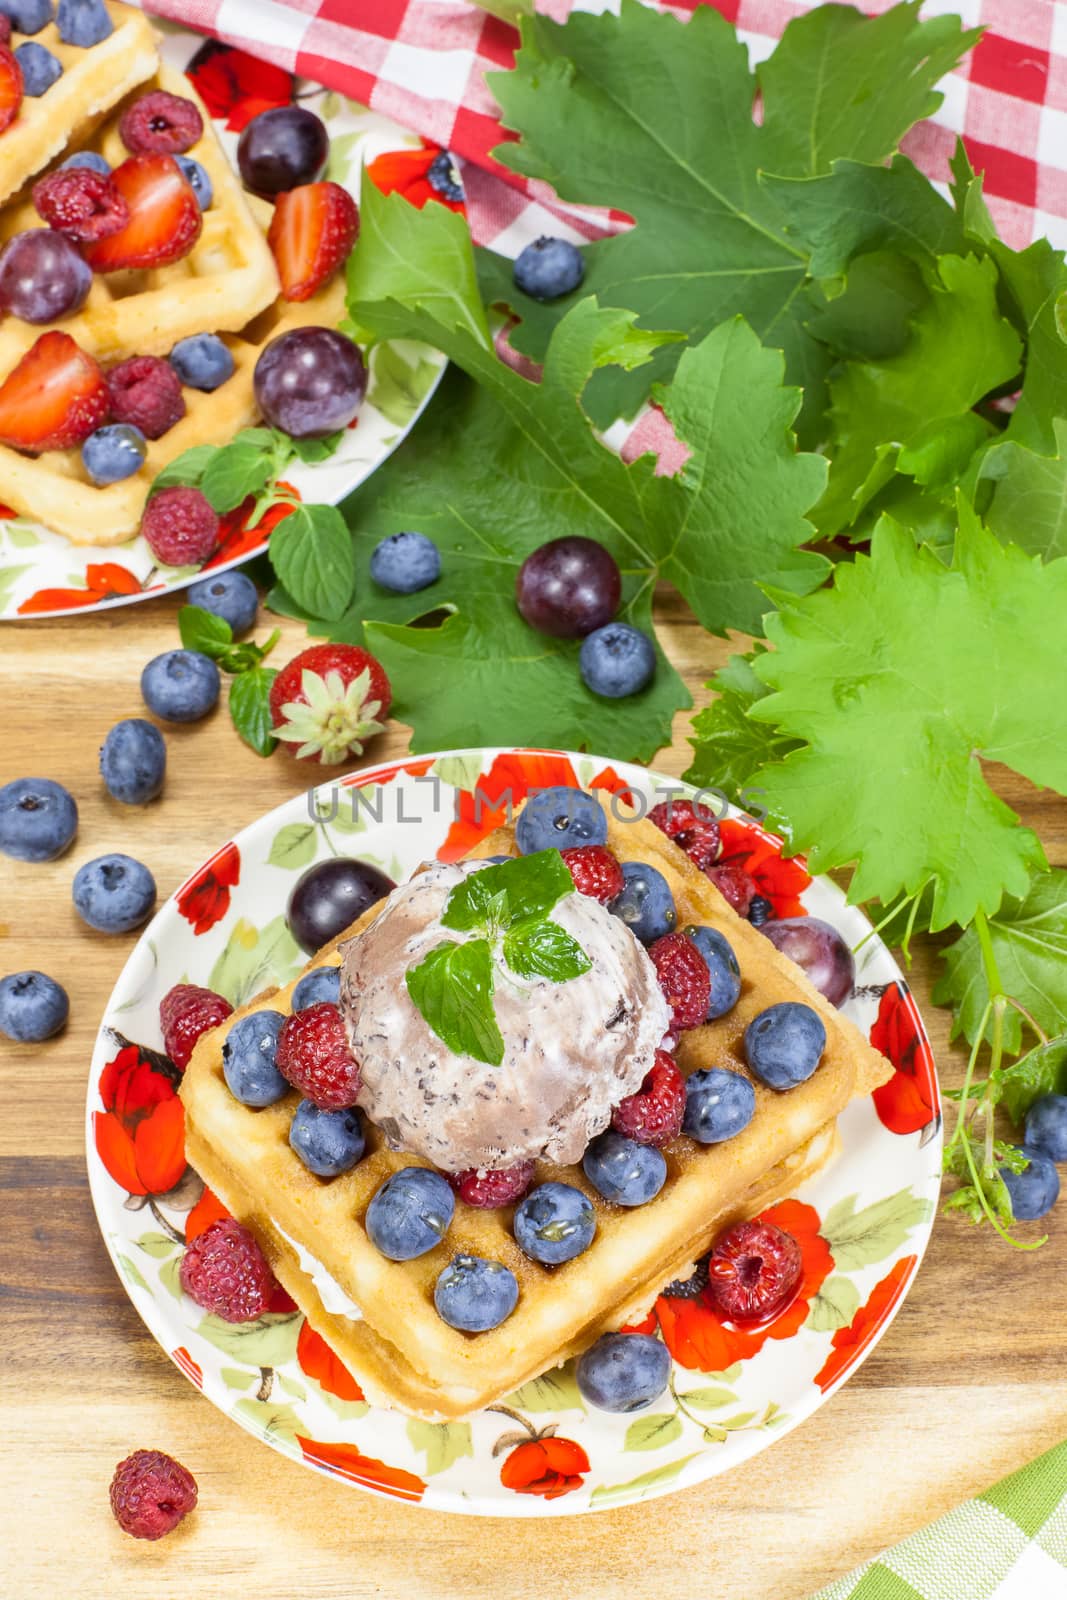 Belgian waffles with fresh raspberries, grapes and blueberries .